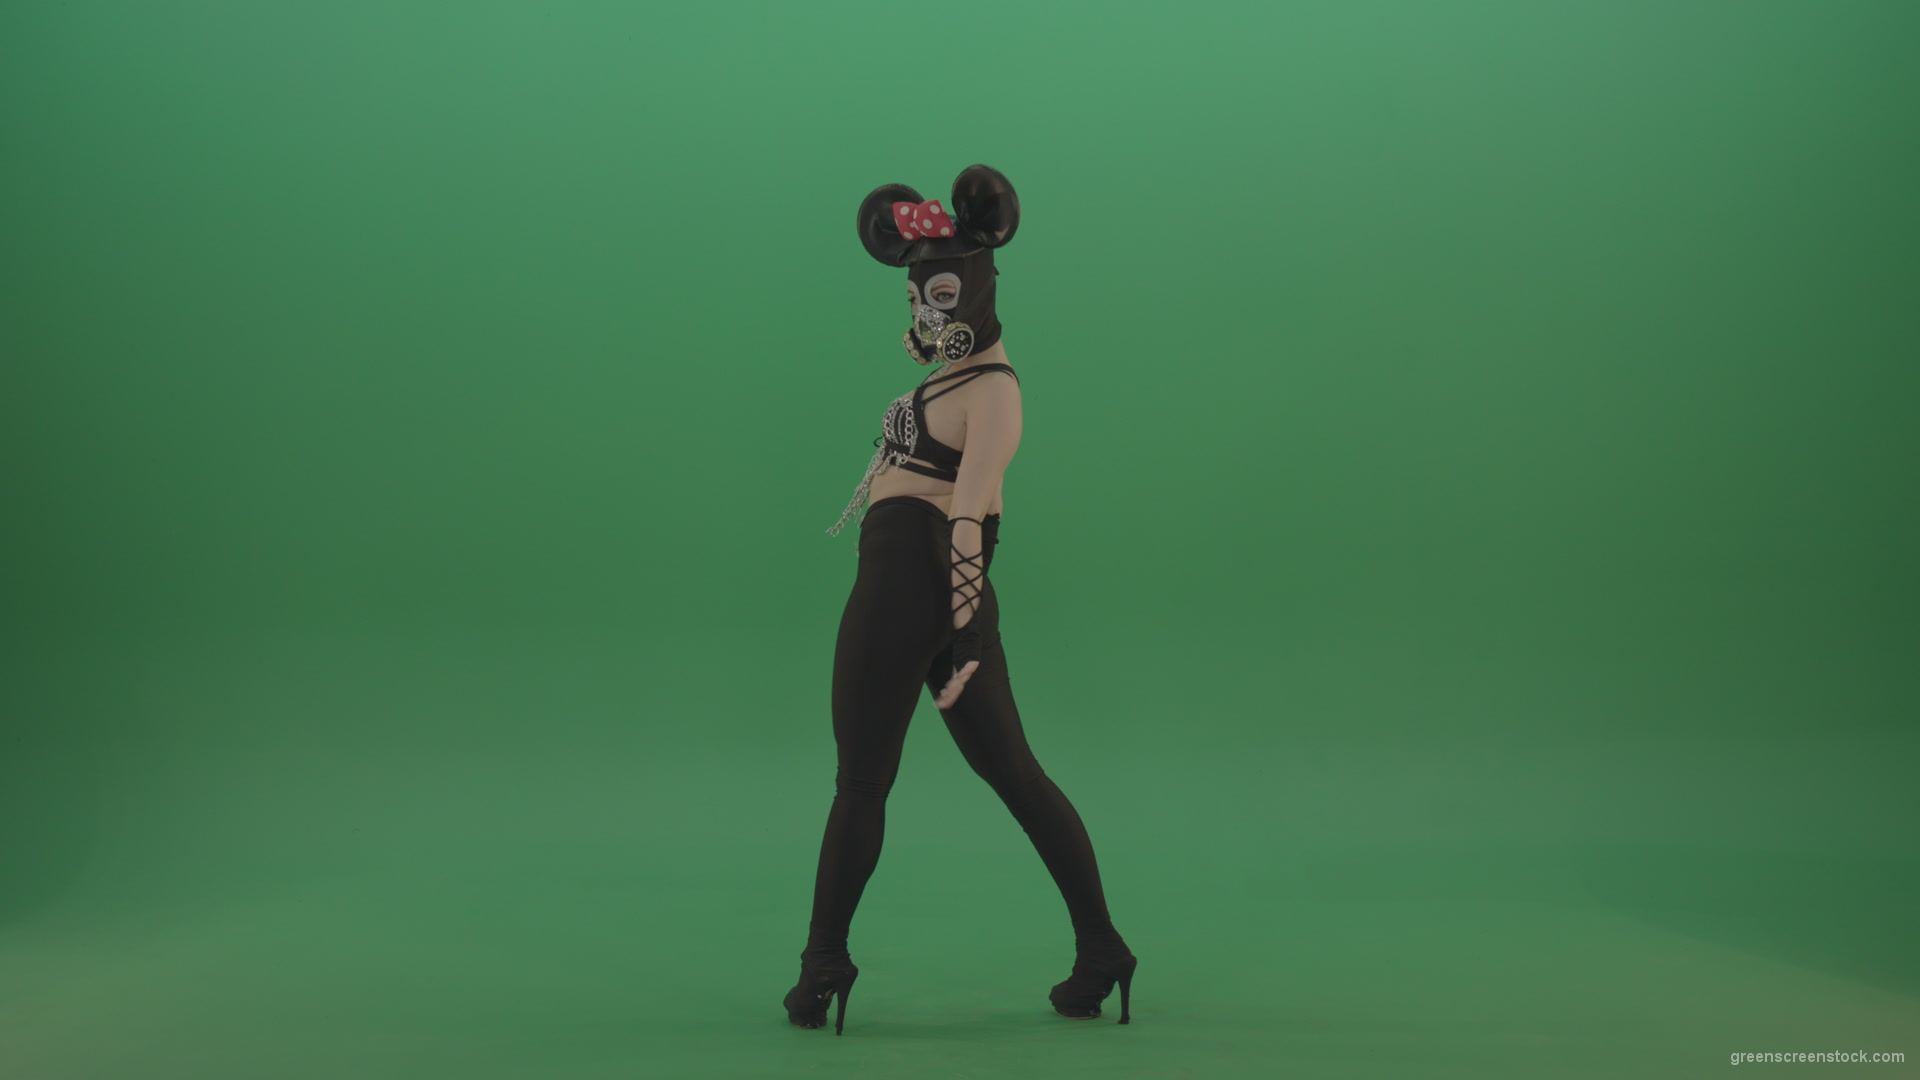 Mouse-Girl-in-mask-dancing-go-go-shaking-ass-and-posing-on-green-screen_001 Green Screen Stock